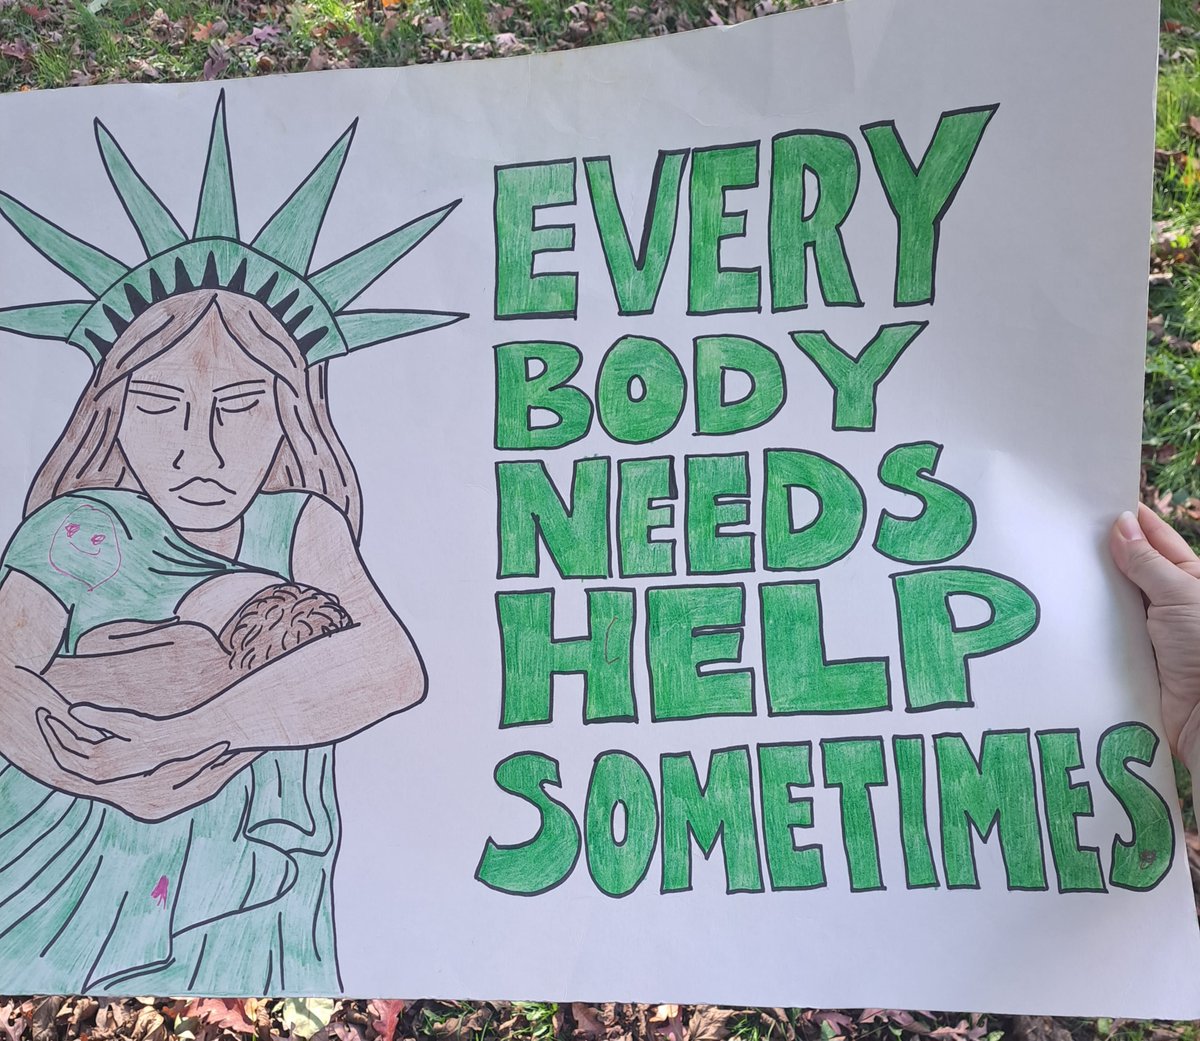 My opponent used this poster (which I still have) in an attack mailer against me. I drew it for the #KeepFamiliesTogether rally abt 5 yrs. ago, at which the crowd was protesting the cruel practice of tearing families apart at the U.S. border, as was happening then. (1/3)